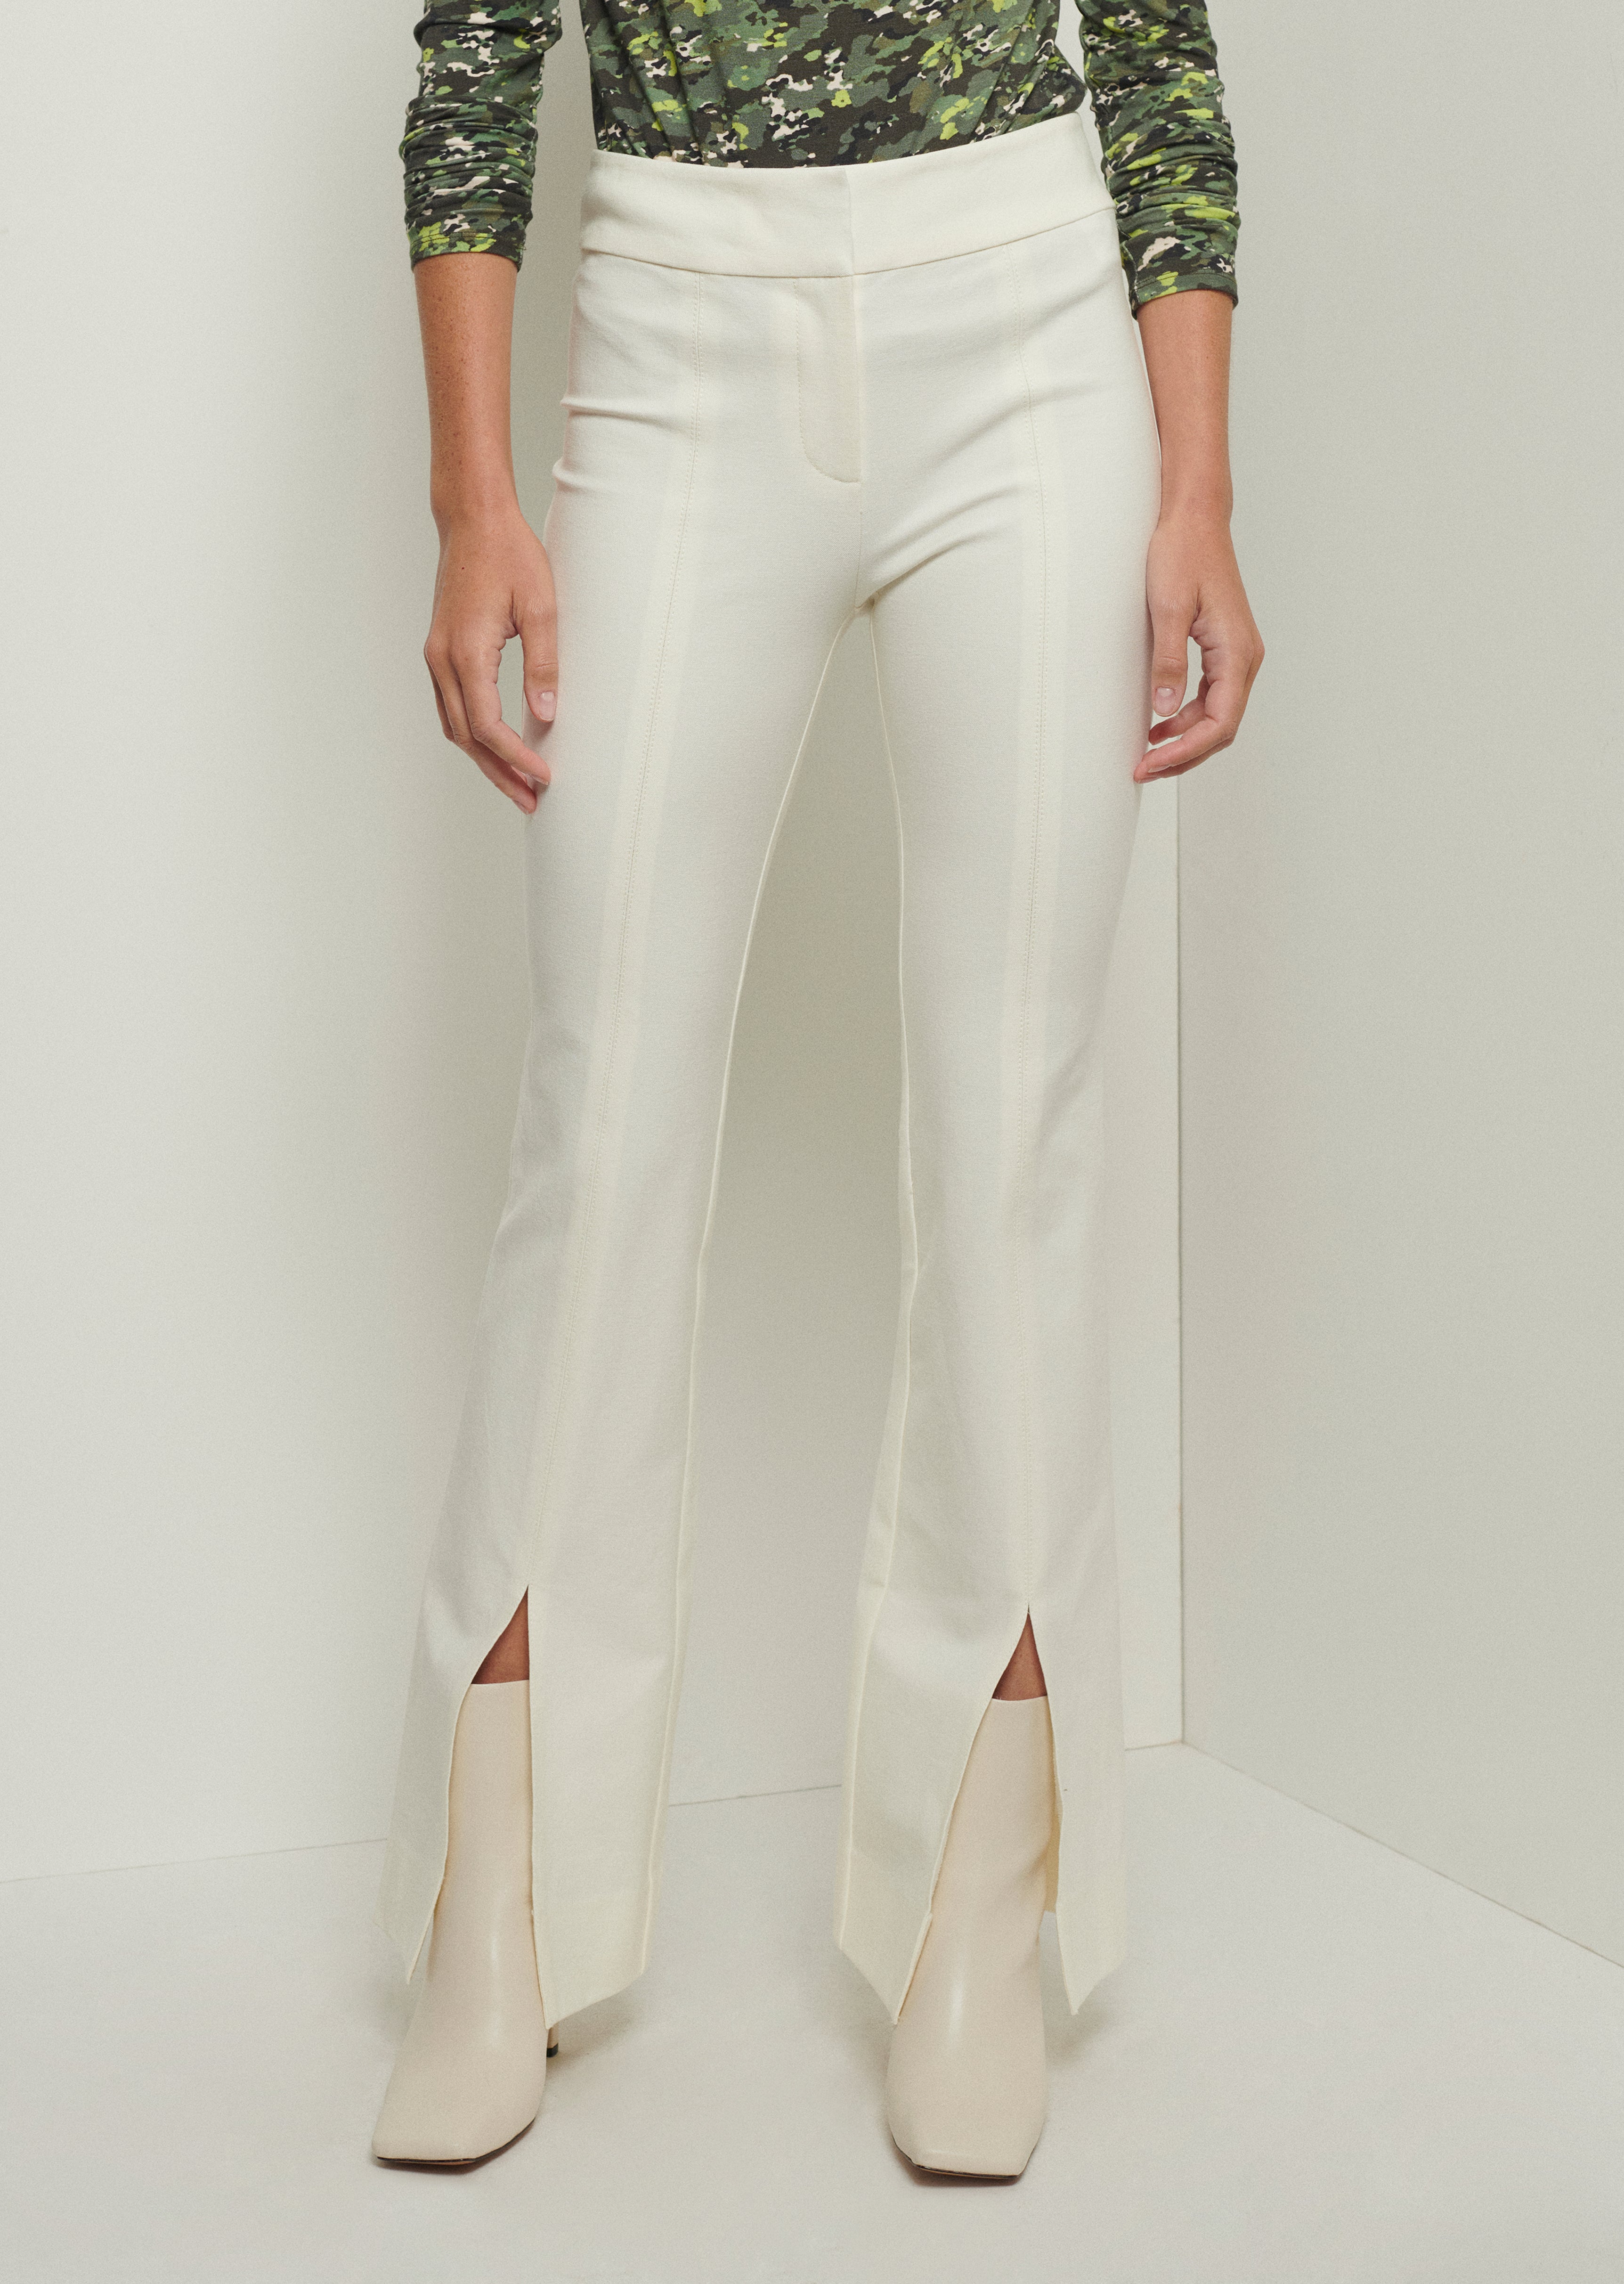 Maeve Front Slit Trousers - Soft White